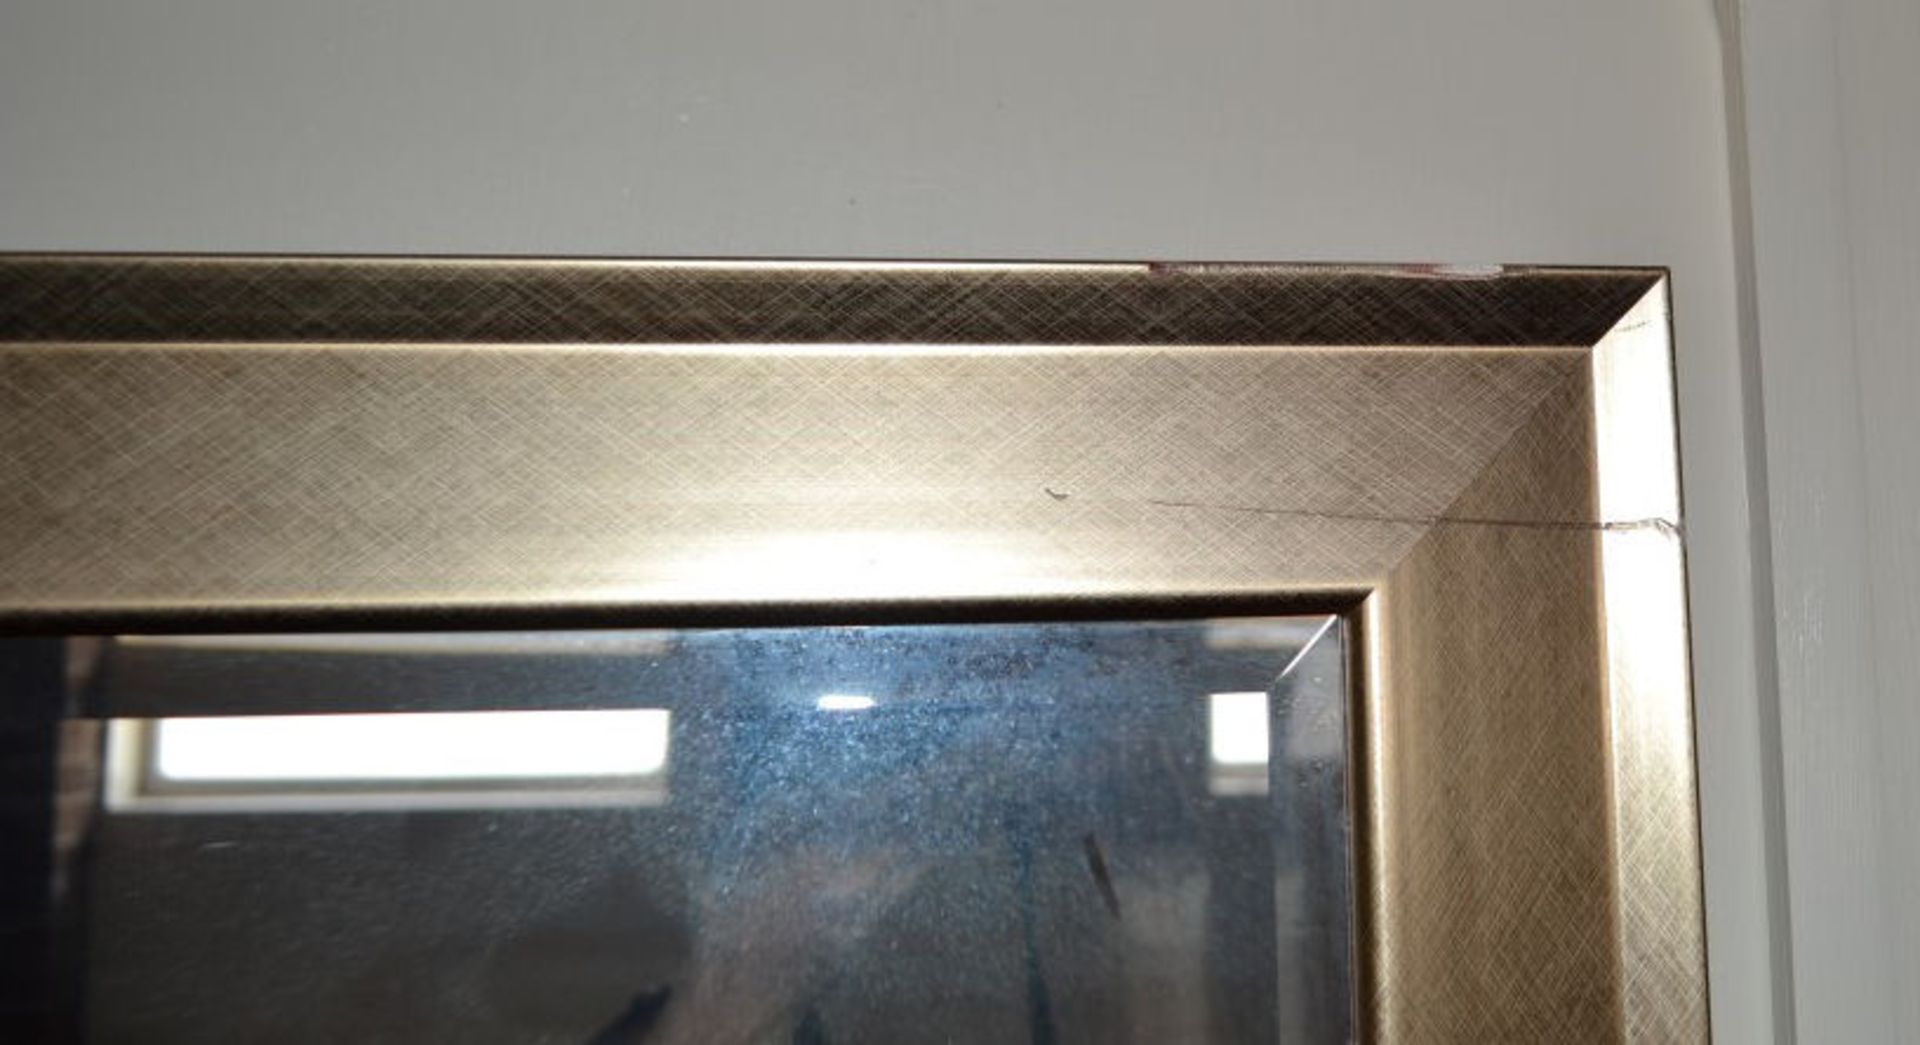 1 x Gold Surround Mirror. 105cm Long. 75cm Tall. Frame Is Around 7.5cm Wide. - Image 4 of 6